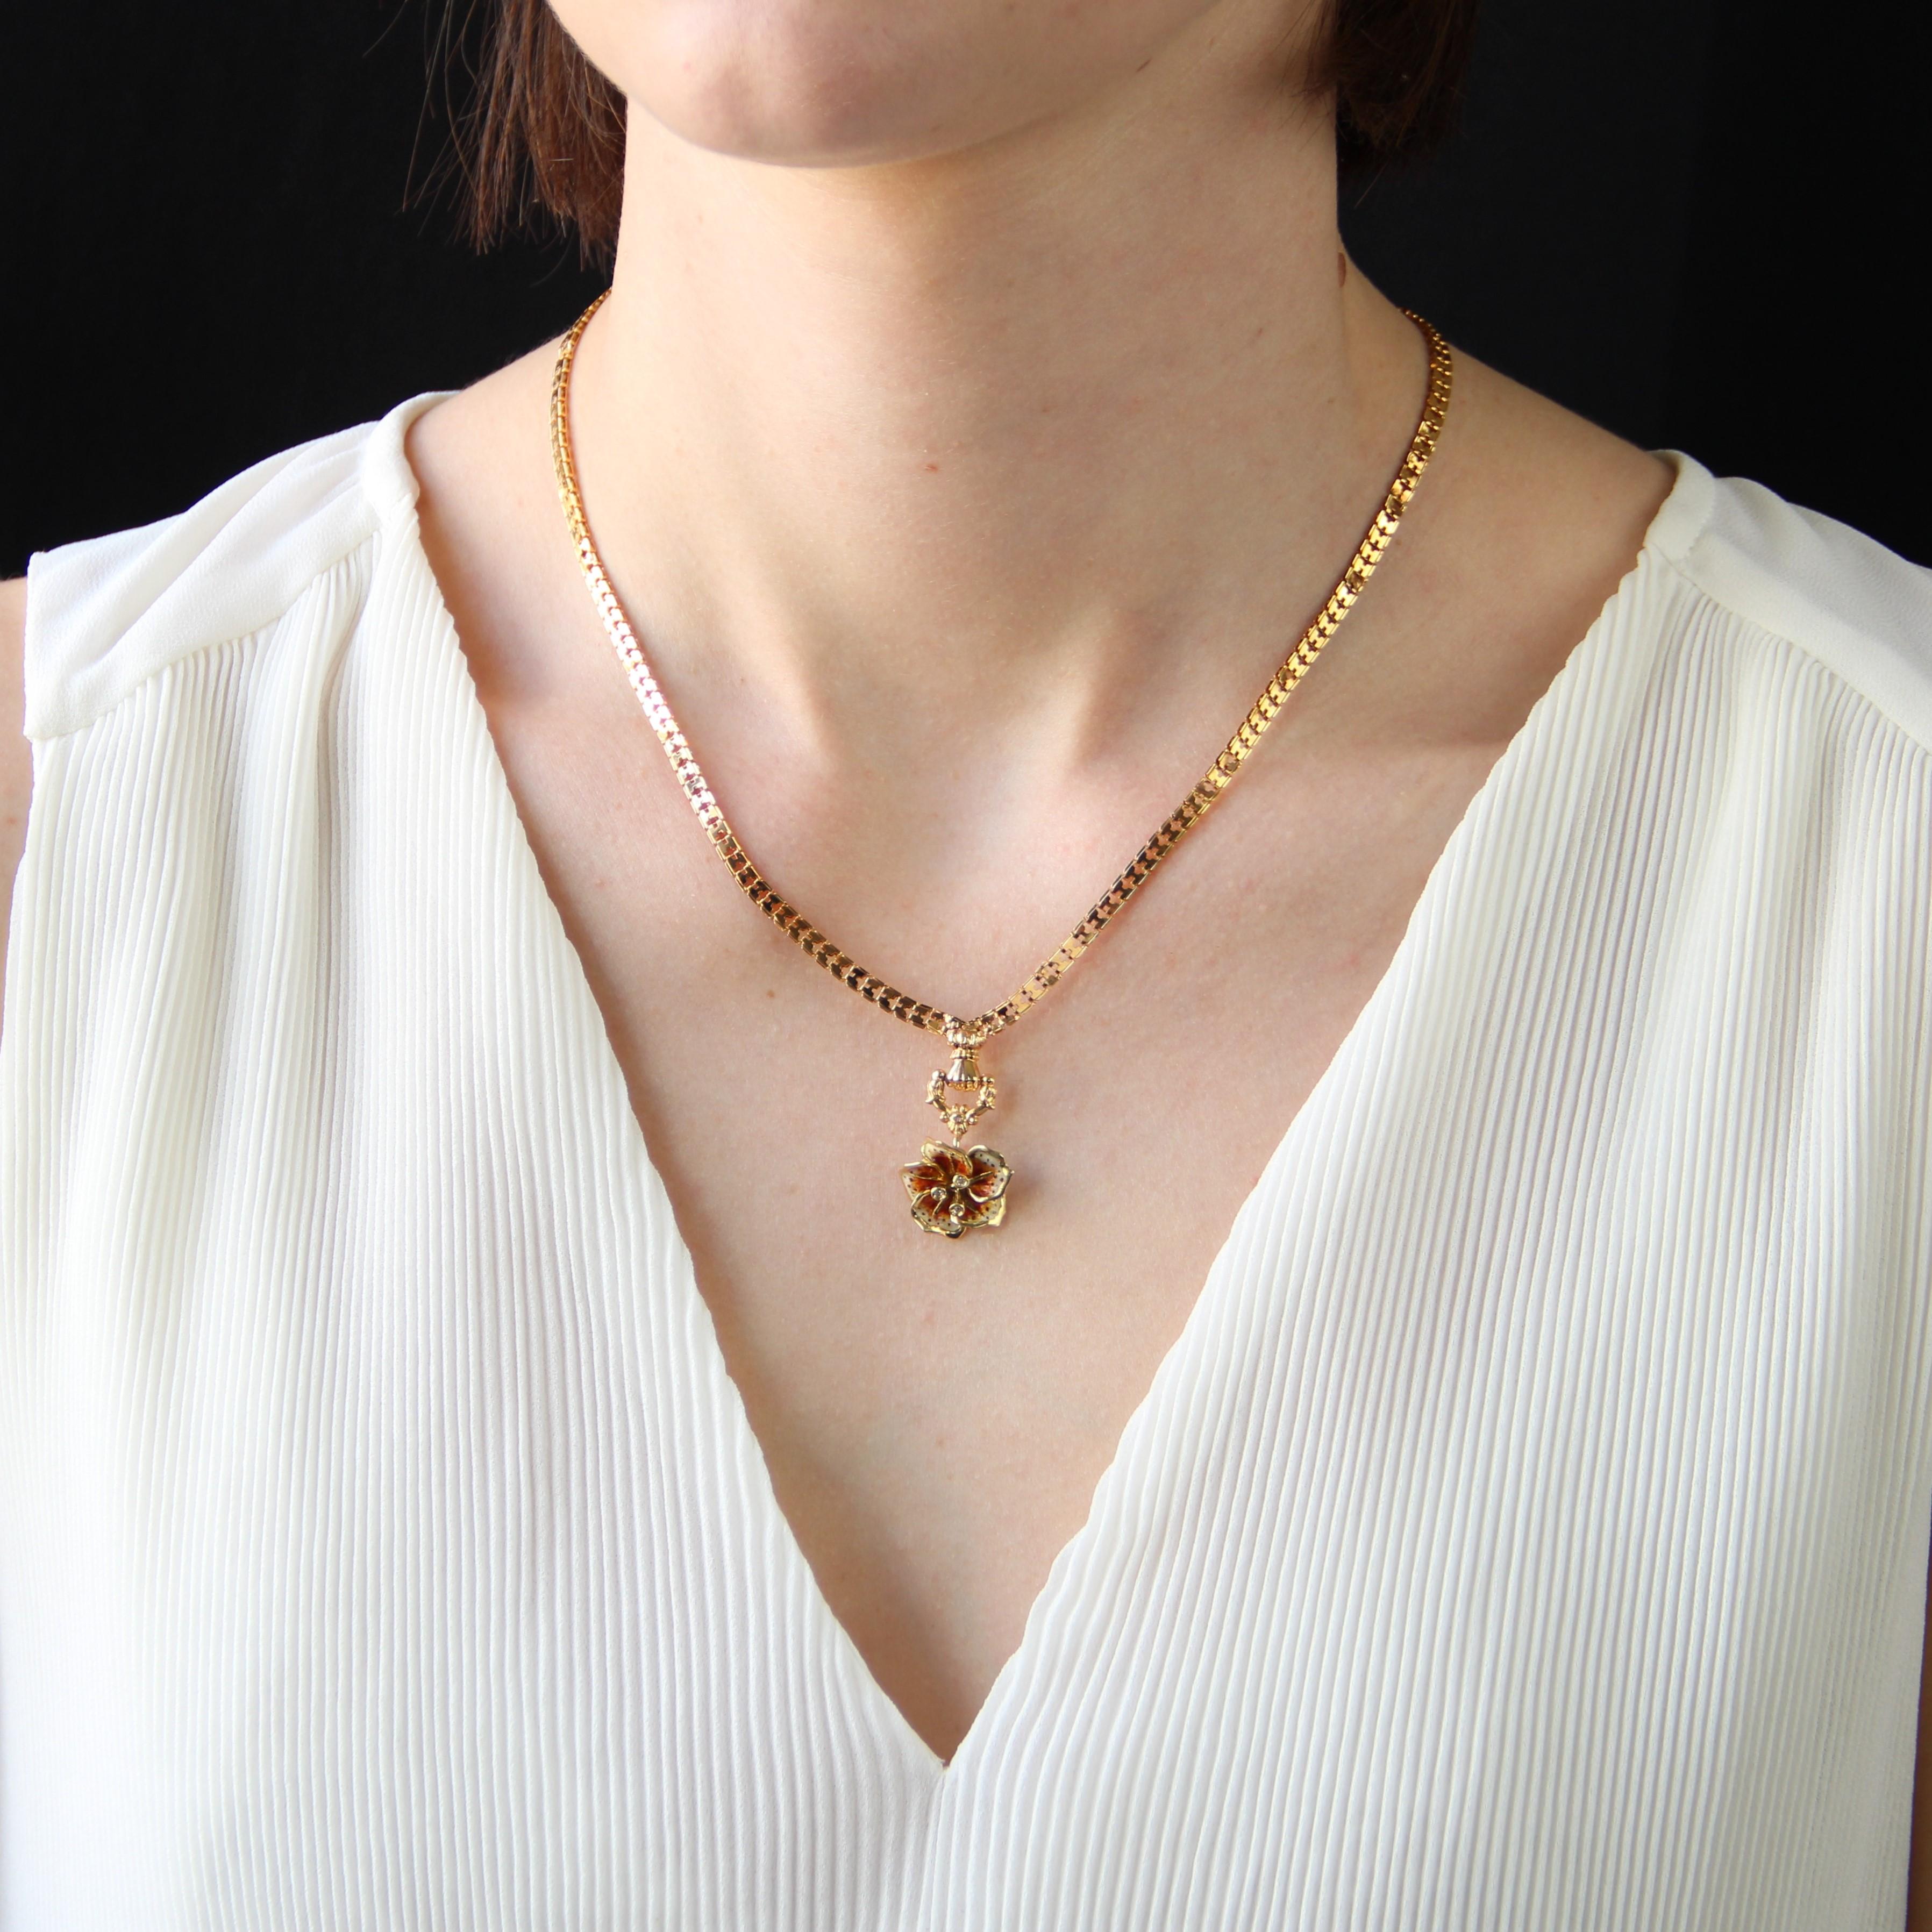 Necklace in 18 karat yellow gold, mixed hallmark.
This charming antique gold necklace is formed of a flat mesh clasp that holds on the front a pattern formed by a gloved hand, holding a stirrup chased with floral motifs, all supporting a pansy